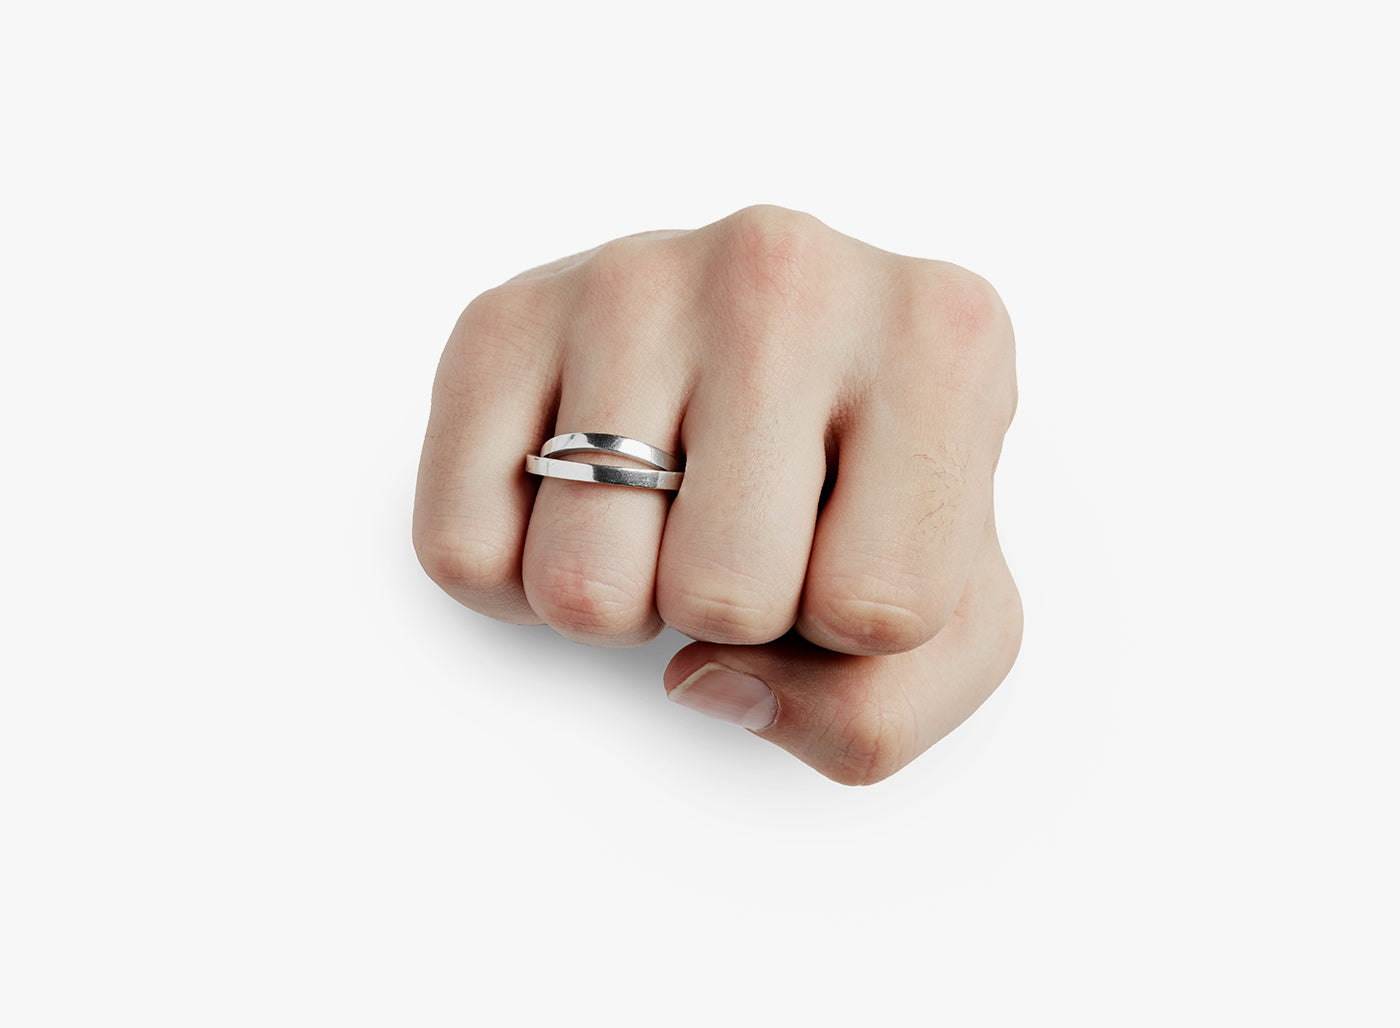 SOLID RING 032